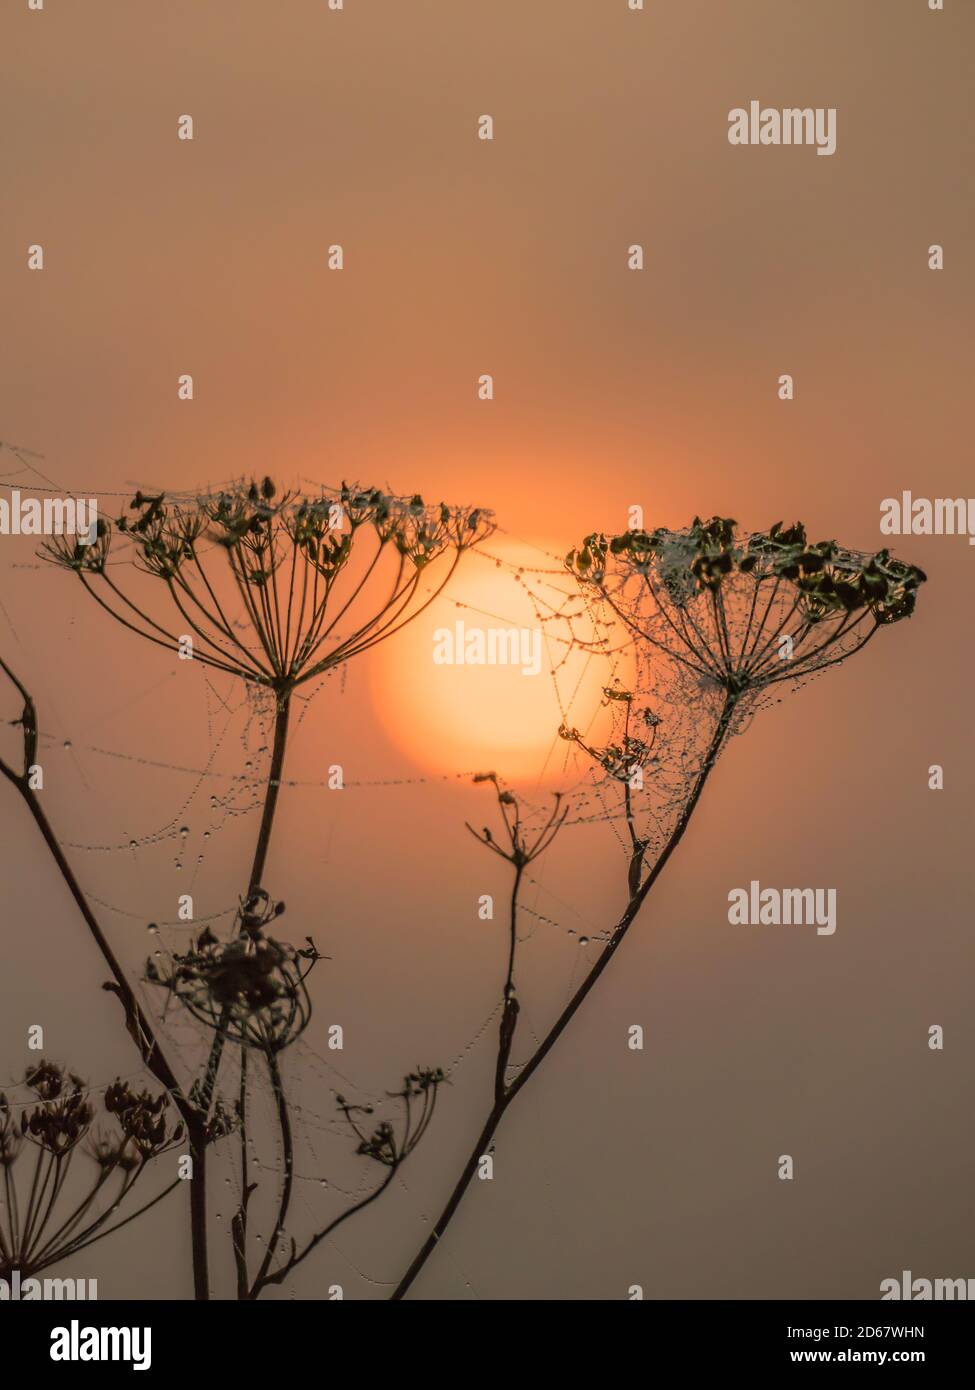 Silhouettes of dry stalks of hogweed with cobwebs covered with dew drops on the background of the rising sun Stock Photo